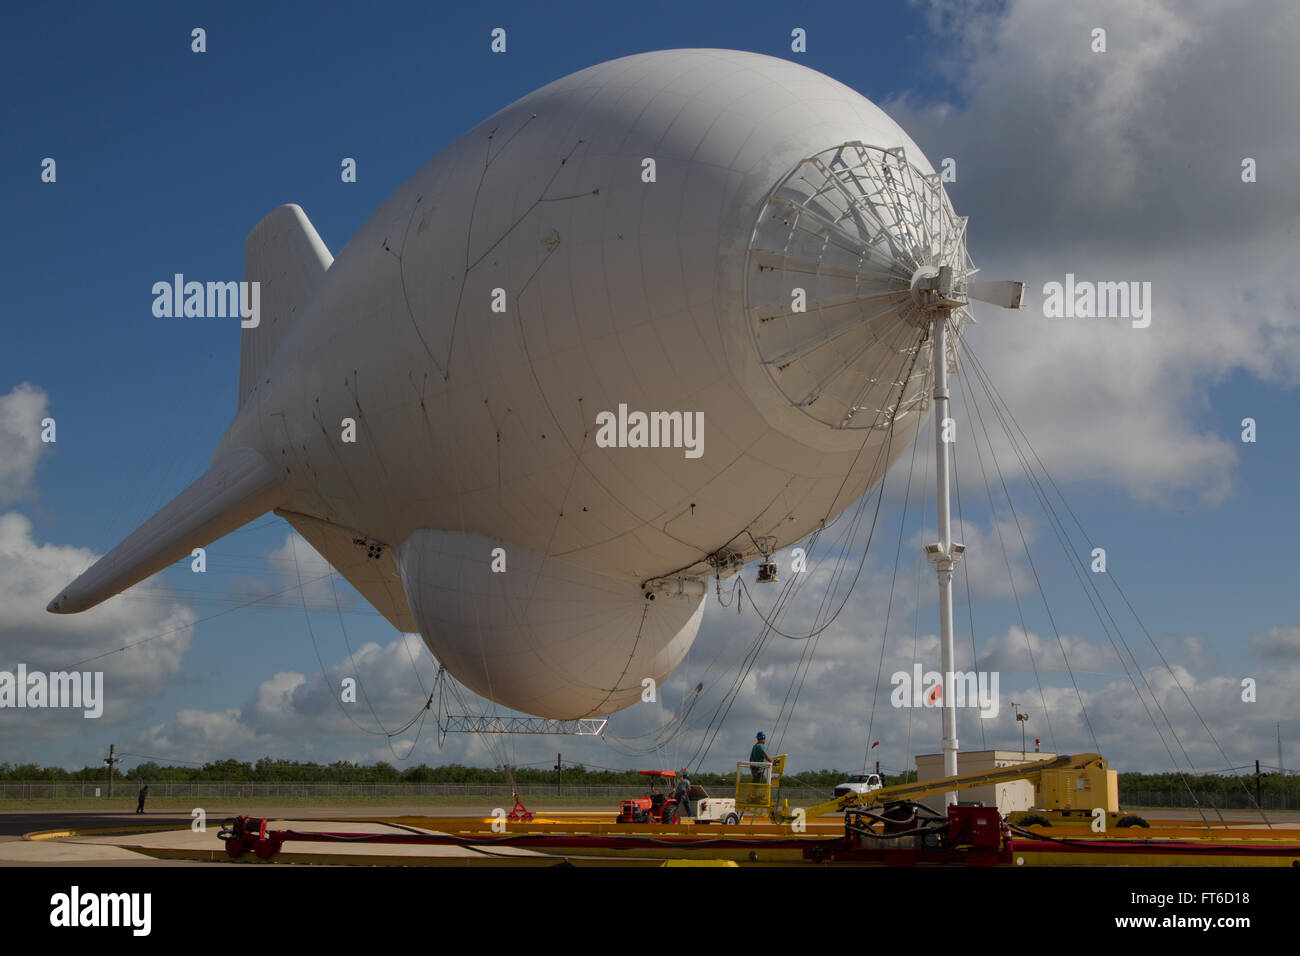 Rio Grande City, TX - The Tethered Aerostat Radar System (TARS) is low-level airborne ground surveillance system that uses aerostats (moored balloons) as radar platforms.  U.S. Customs and Border Protection, Air and Marine Operations use the TARS to provide persistent, long-range detection and monitoring (radar surveillance) capability for interdicting low-level air, maritime and surface smugglers and narcotics traffickers. Photographer: Donna Burton Stock Photo